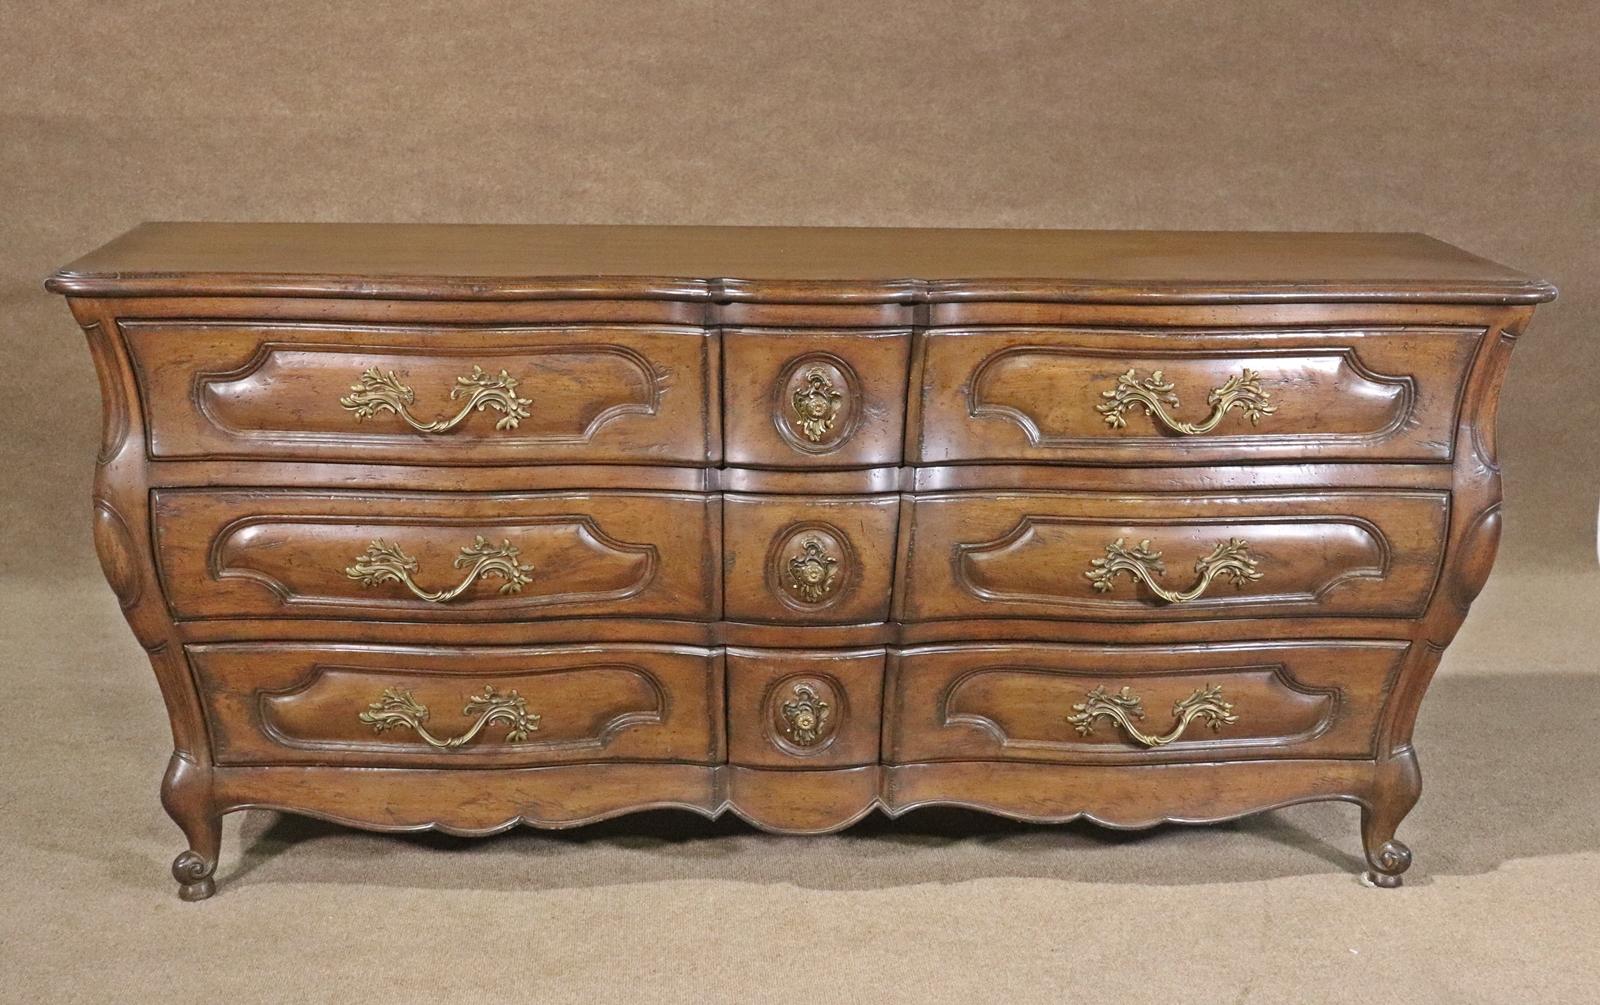 Wood .Carved. 9 drawers. Brass hardware. 34 3/4